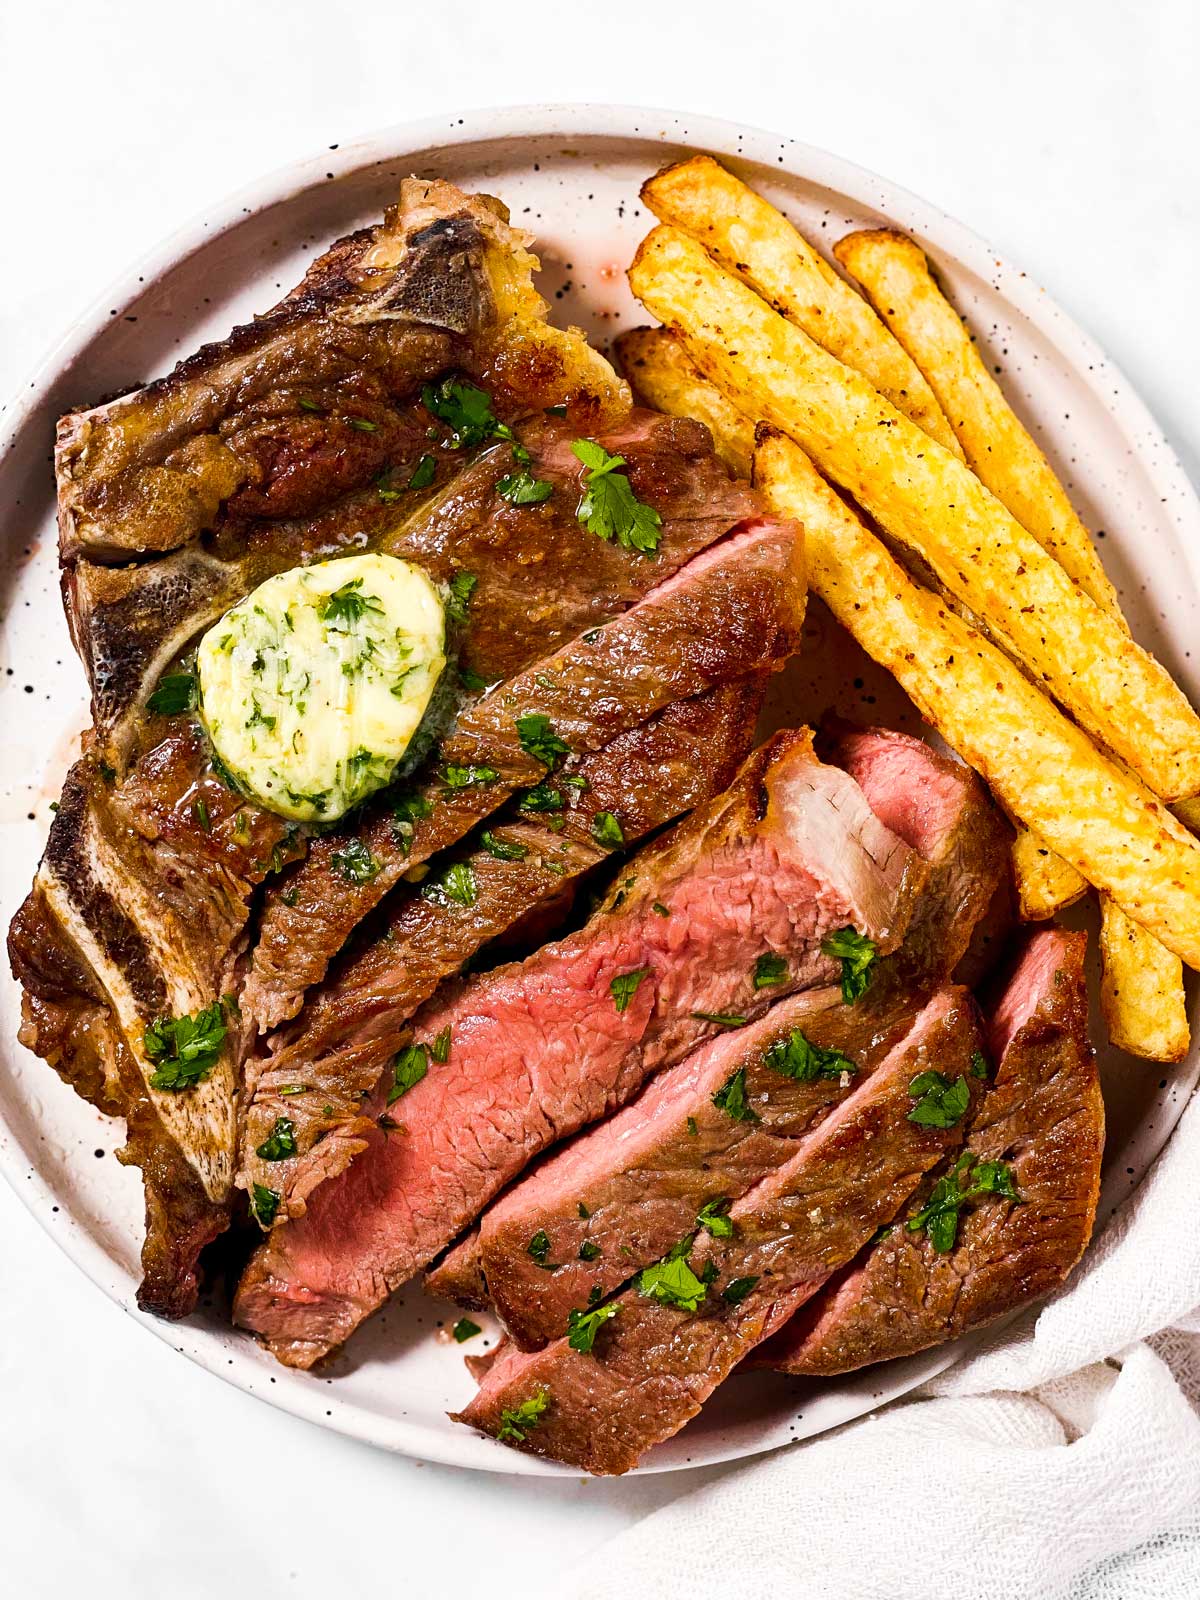 sliced steak topped with garlic butter next to french fries on white plate